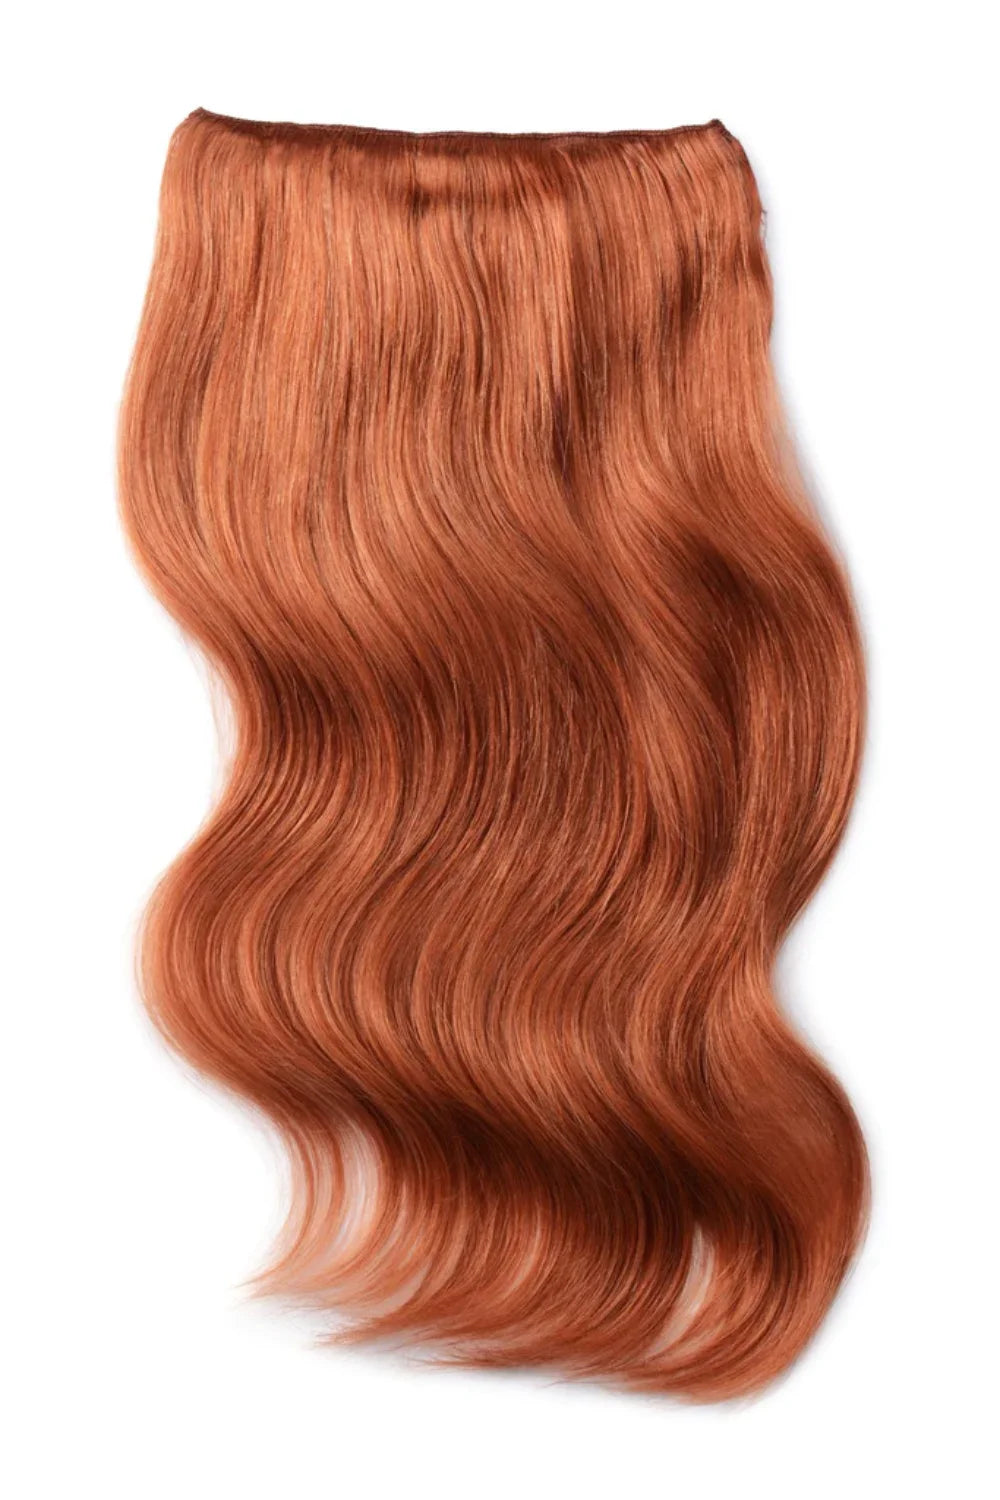 Double Wefted Full Head Remy Clip in Human Hair Extensions - Cowgirl Copper (#350/33)